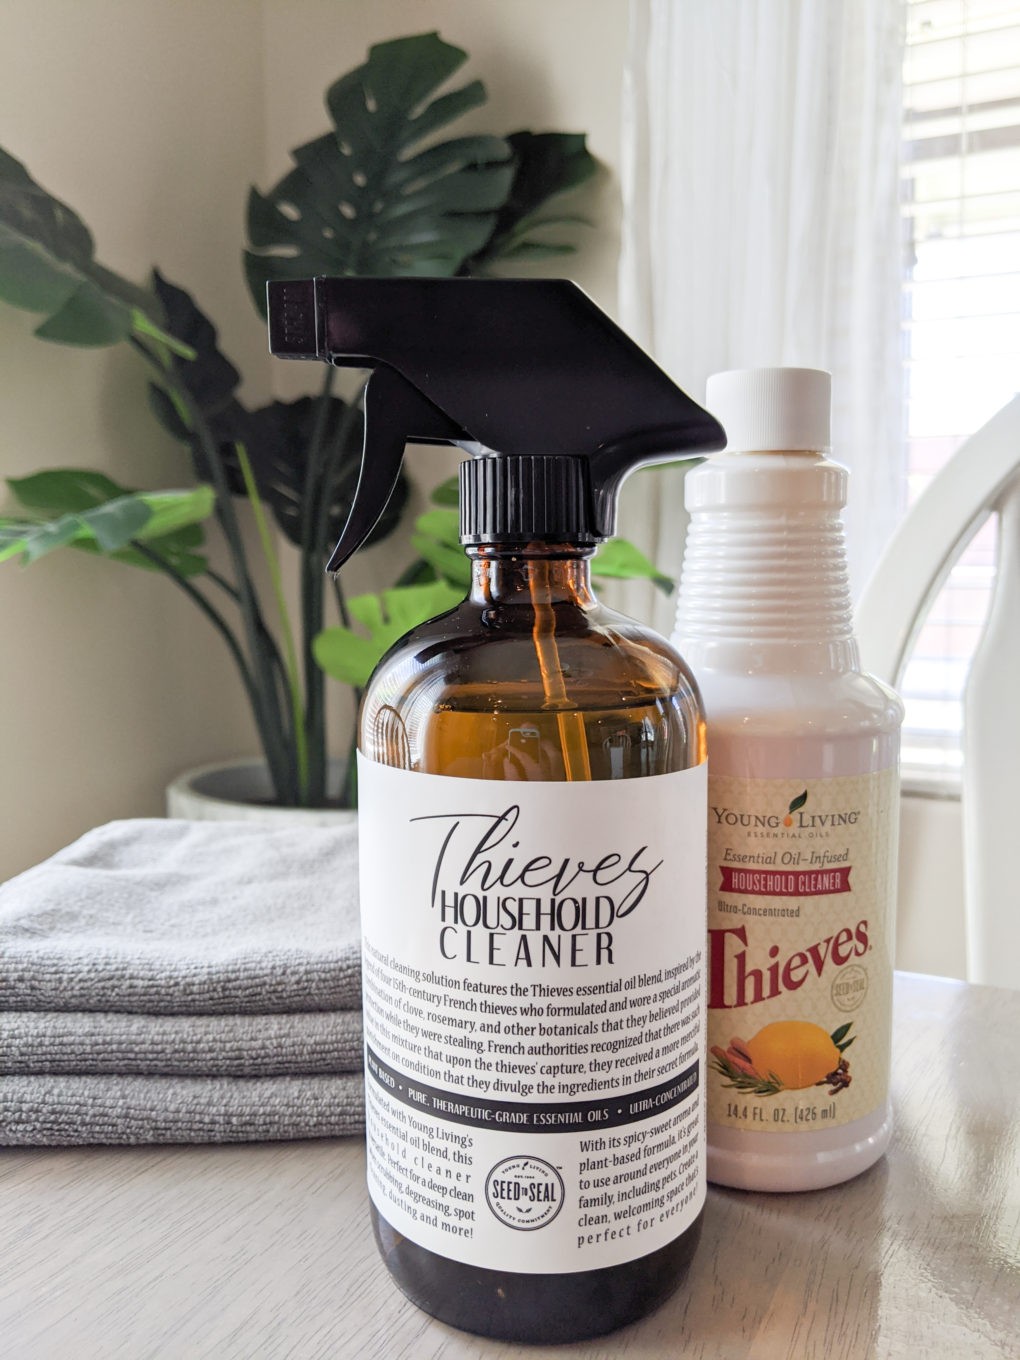 Thieves non toxic household cleaner -- Environmentally friendly switches to use less single-use plastic bags, plastic wrap, dryer sheets, etc. Reusable ideas and ways to be eco friendly.